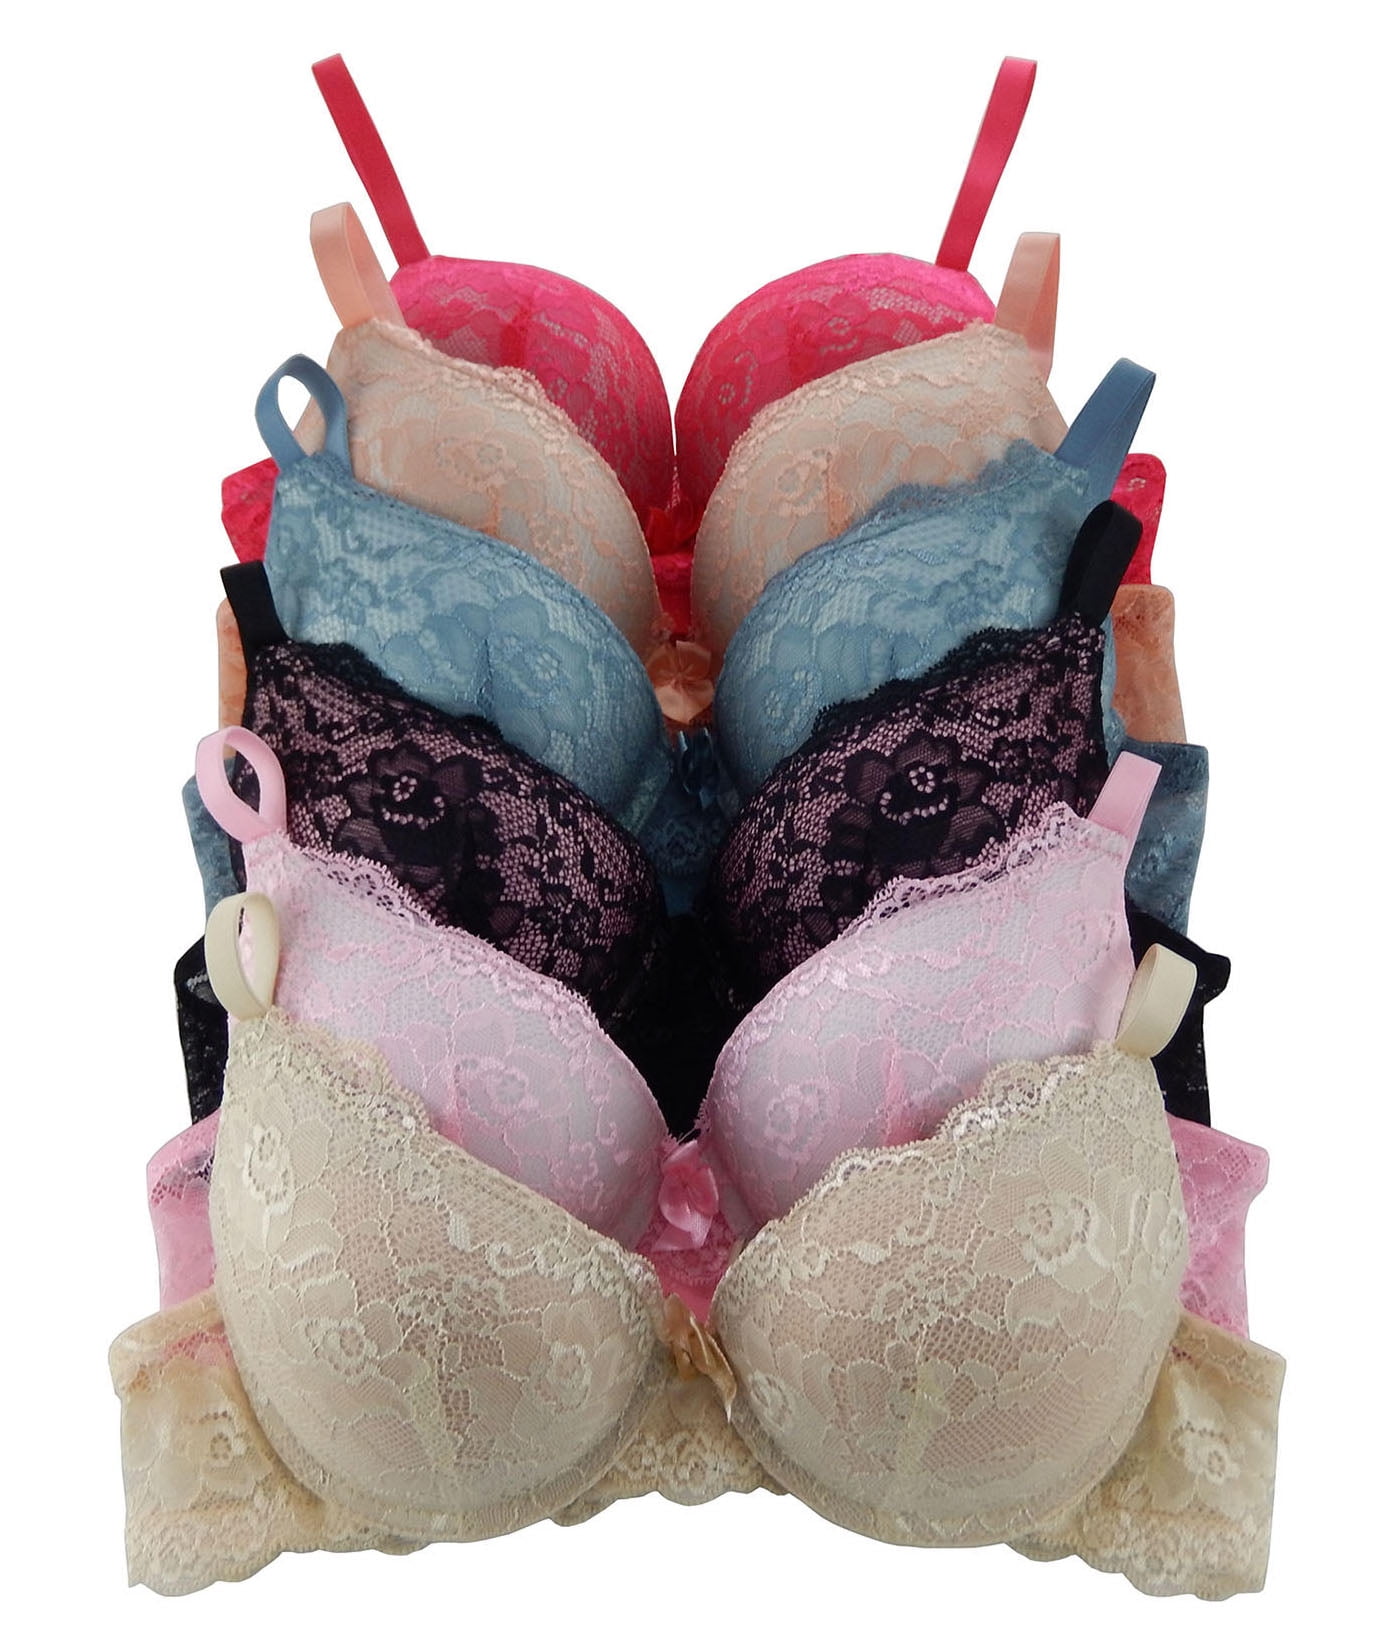 Women Bras 6 Pack of Double Pushup Lace Bra B cup C cup Size 34B (9904)